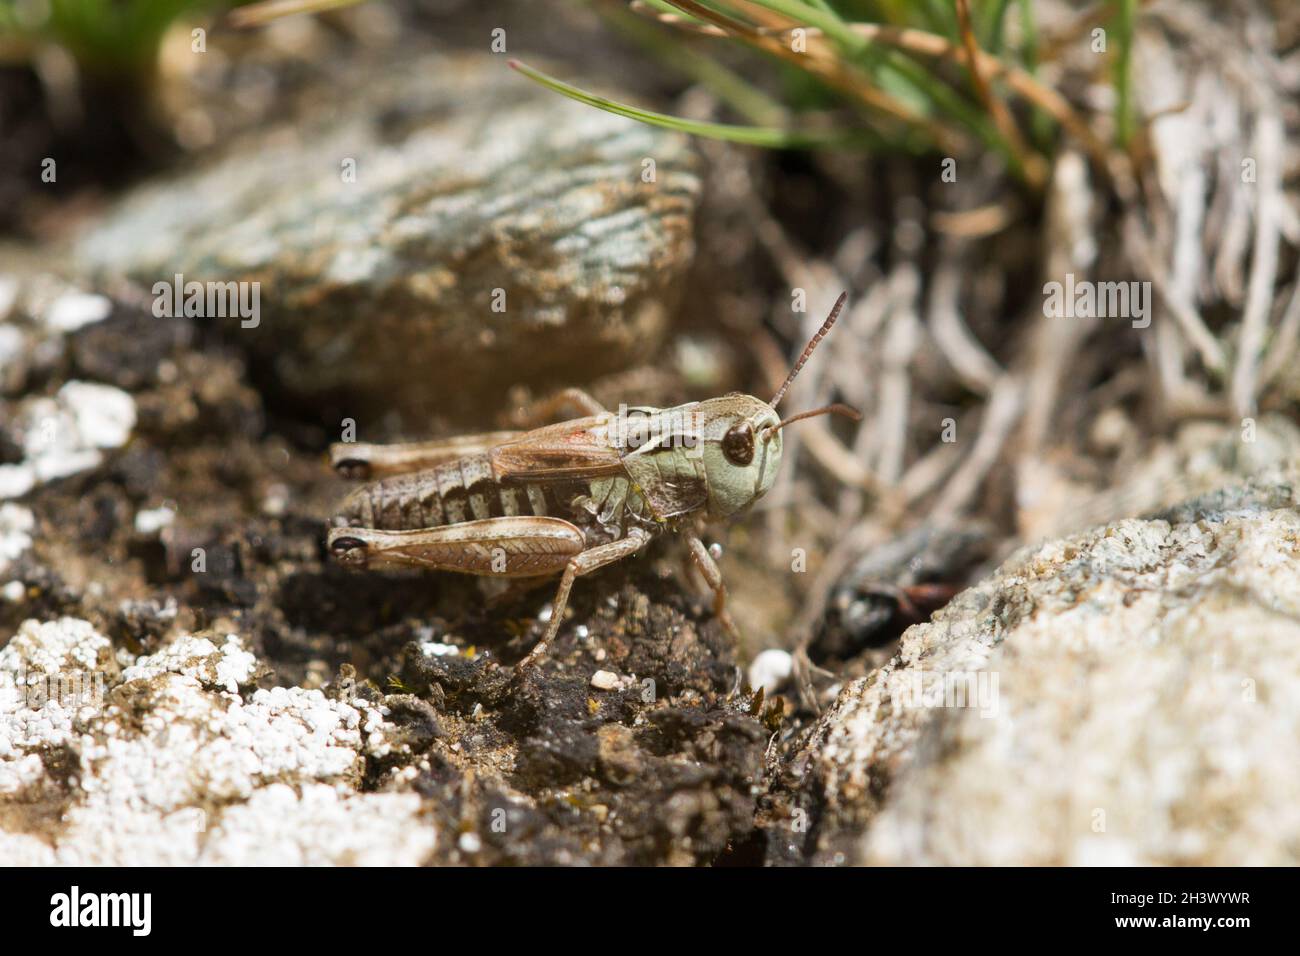 Ursula's Toothed Grasshopper (Stenobothrus ursulae), a male. Endemism of NW-Italian Alps. Mont Avic Natural Park, Aosta, Italy. Stock Photo